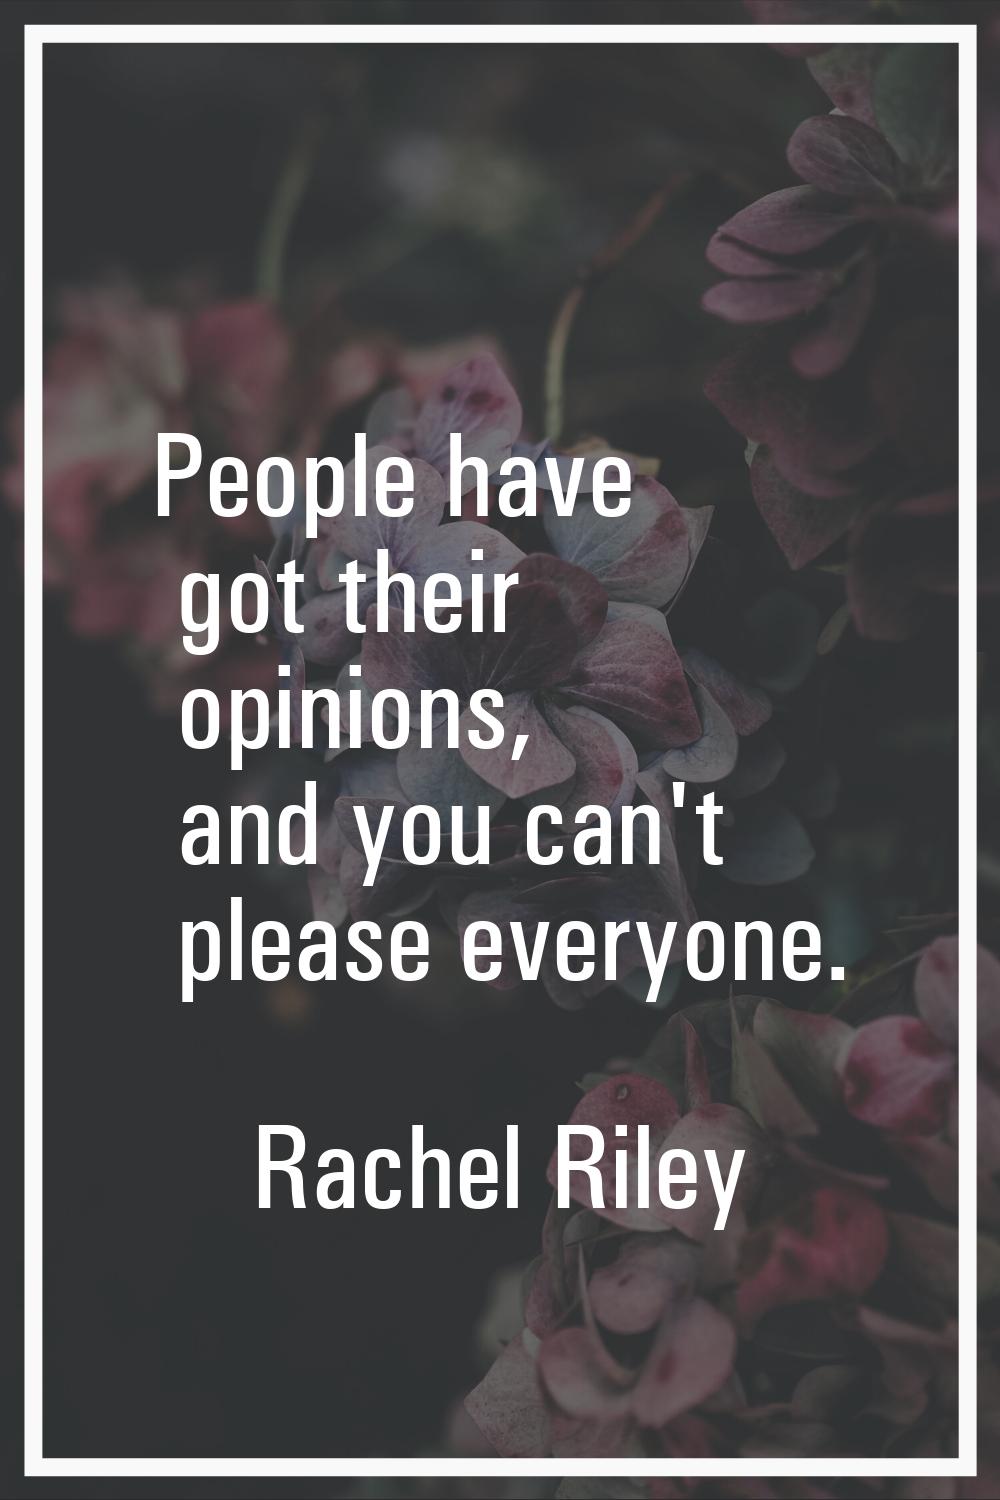 People have got their opinions, and you can't please everyone.